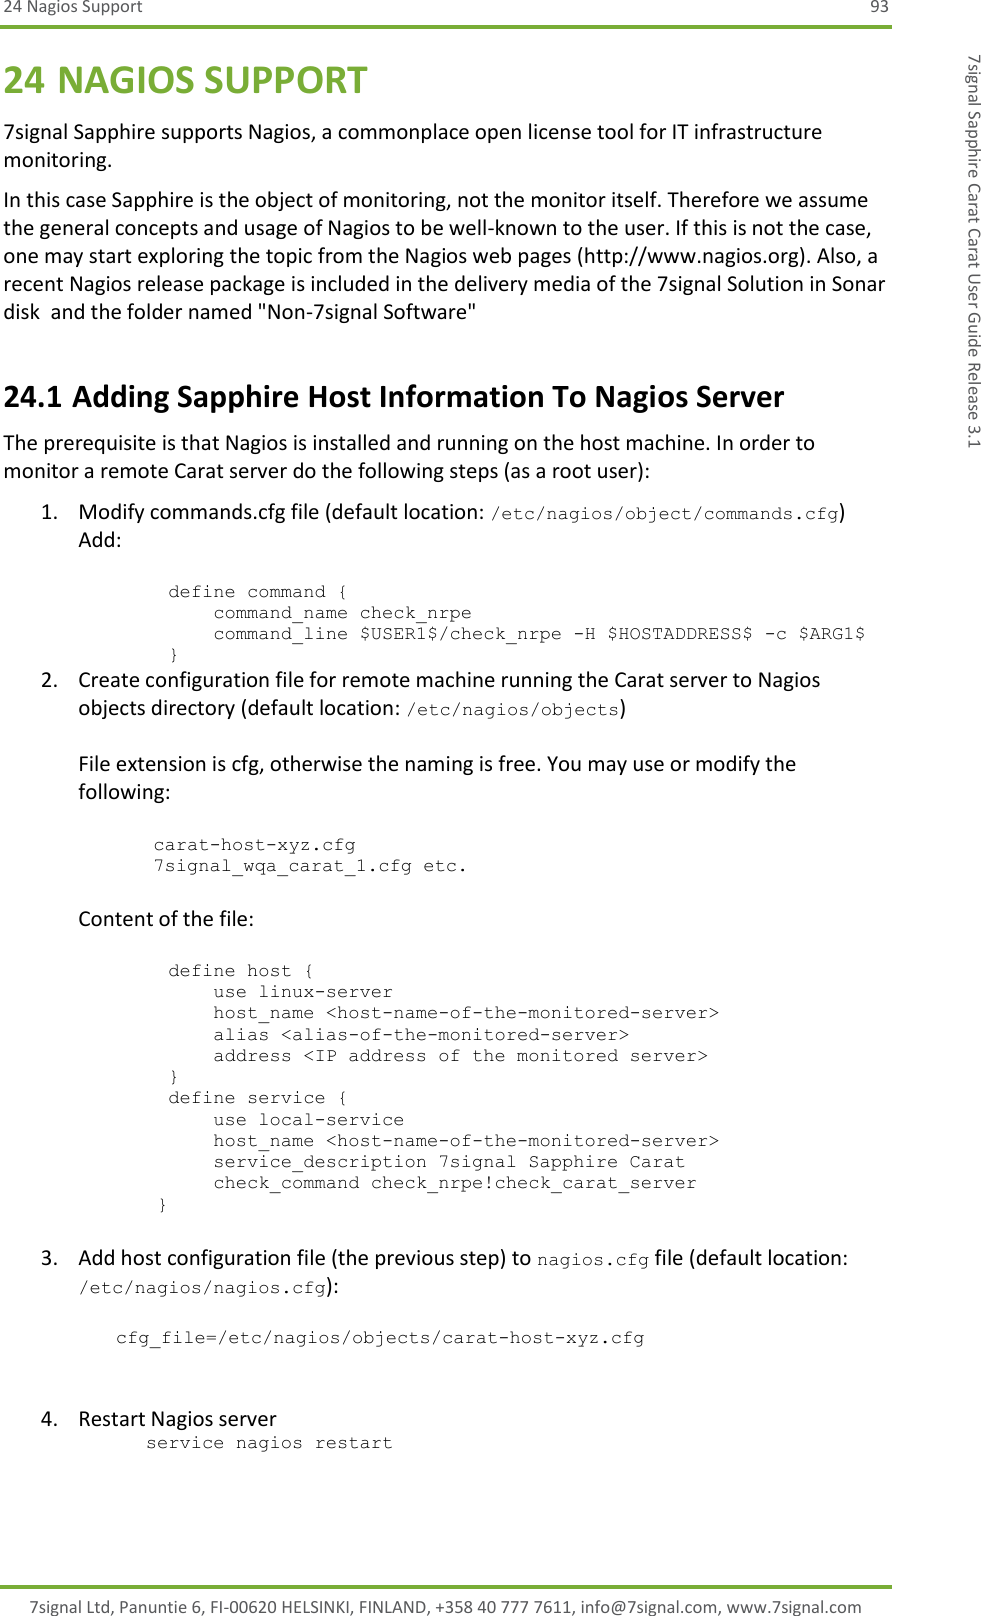 24 Nagios Support  93 7signal Ltd, Panuntie 6, FI-00620 HELSINKI, FINLAND, +358 40 777 7611, info@7signal.com, www.7signal.com 7signal Sapphire Carat Carat User Guide Release 3.1 24 NAGIOS SUPPORT 7signal Sapphire supports Nagios, a commonplace open license tool for IT infrastructure monitoring. In this case Sapphire is the object of monitoring, not the monitor itself. Therefore we assume the general concepts and usage of Nagios to be well-known to the user. If this is not the case, one may start exploring the topic from the Nagios web pages (http://www.nagios.org). Also, a recent Nagios release package is included in the delivery media of the 7signal Solution in Sonar disk  and the folder named &quot;Non-7signal Software&quot; 24.1 Adding Sapphire Host Information To Nagios Server The prerequisite is that Nagios is installed and running on the host machine. In order to monitor a remote Carat server do the following steps (as a root user): 1. Modify commands.cfg file (default location: /etc/nagios/object/commands.cfg) Add:           define command {             command_name check_nrpe             command_line $USER1$/check_nrpe -H $HOSTADDRESS$ -c $ARG1$         } 2. Create configuration file for remote machine running the Carat server to Nagios objects directory (default location: /etc/nagios/objects)  File extension is cfg, otherwise the naming is free. You may use or modify the following:  carat-host-xyz.cfg 7signal_wqa_carat_1.cfg etc.  Content of the file:           define host {             use linux-server             host_name &lt;host-name-of-the-monitored-server&gt;             alias &lt;alias-of-the-monitored-server&gt;             address &lt;IP address of the monitored server&gt;         }         define service {             use local-service             host_name &lt;host-name-of-the-monitored-server&gt;             service_description 7signal Sapphire Carat             check_command check_nrpe!check_carat_server        }  3. Add host configuration file (the previous step) to nagios.cfg file (default location: /etc/nagios/nagios.cfg):  cfg_file=/etc/nagios/objects/carat-host-xyz.cfg    4. Restart Nagios server       service nagios restart 